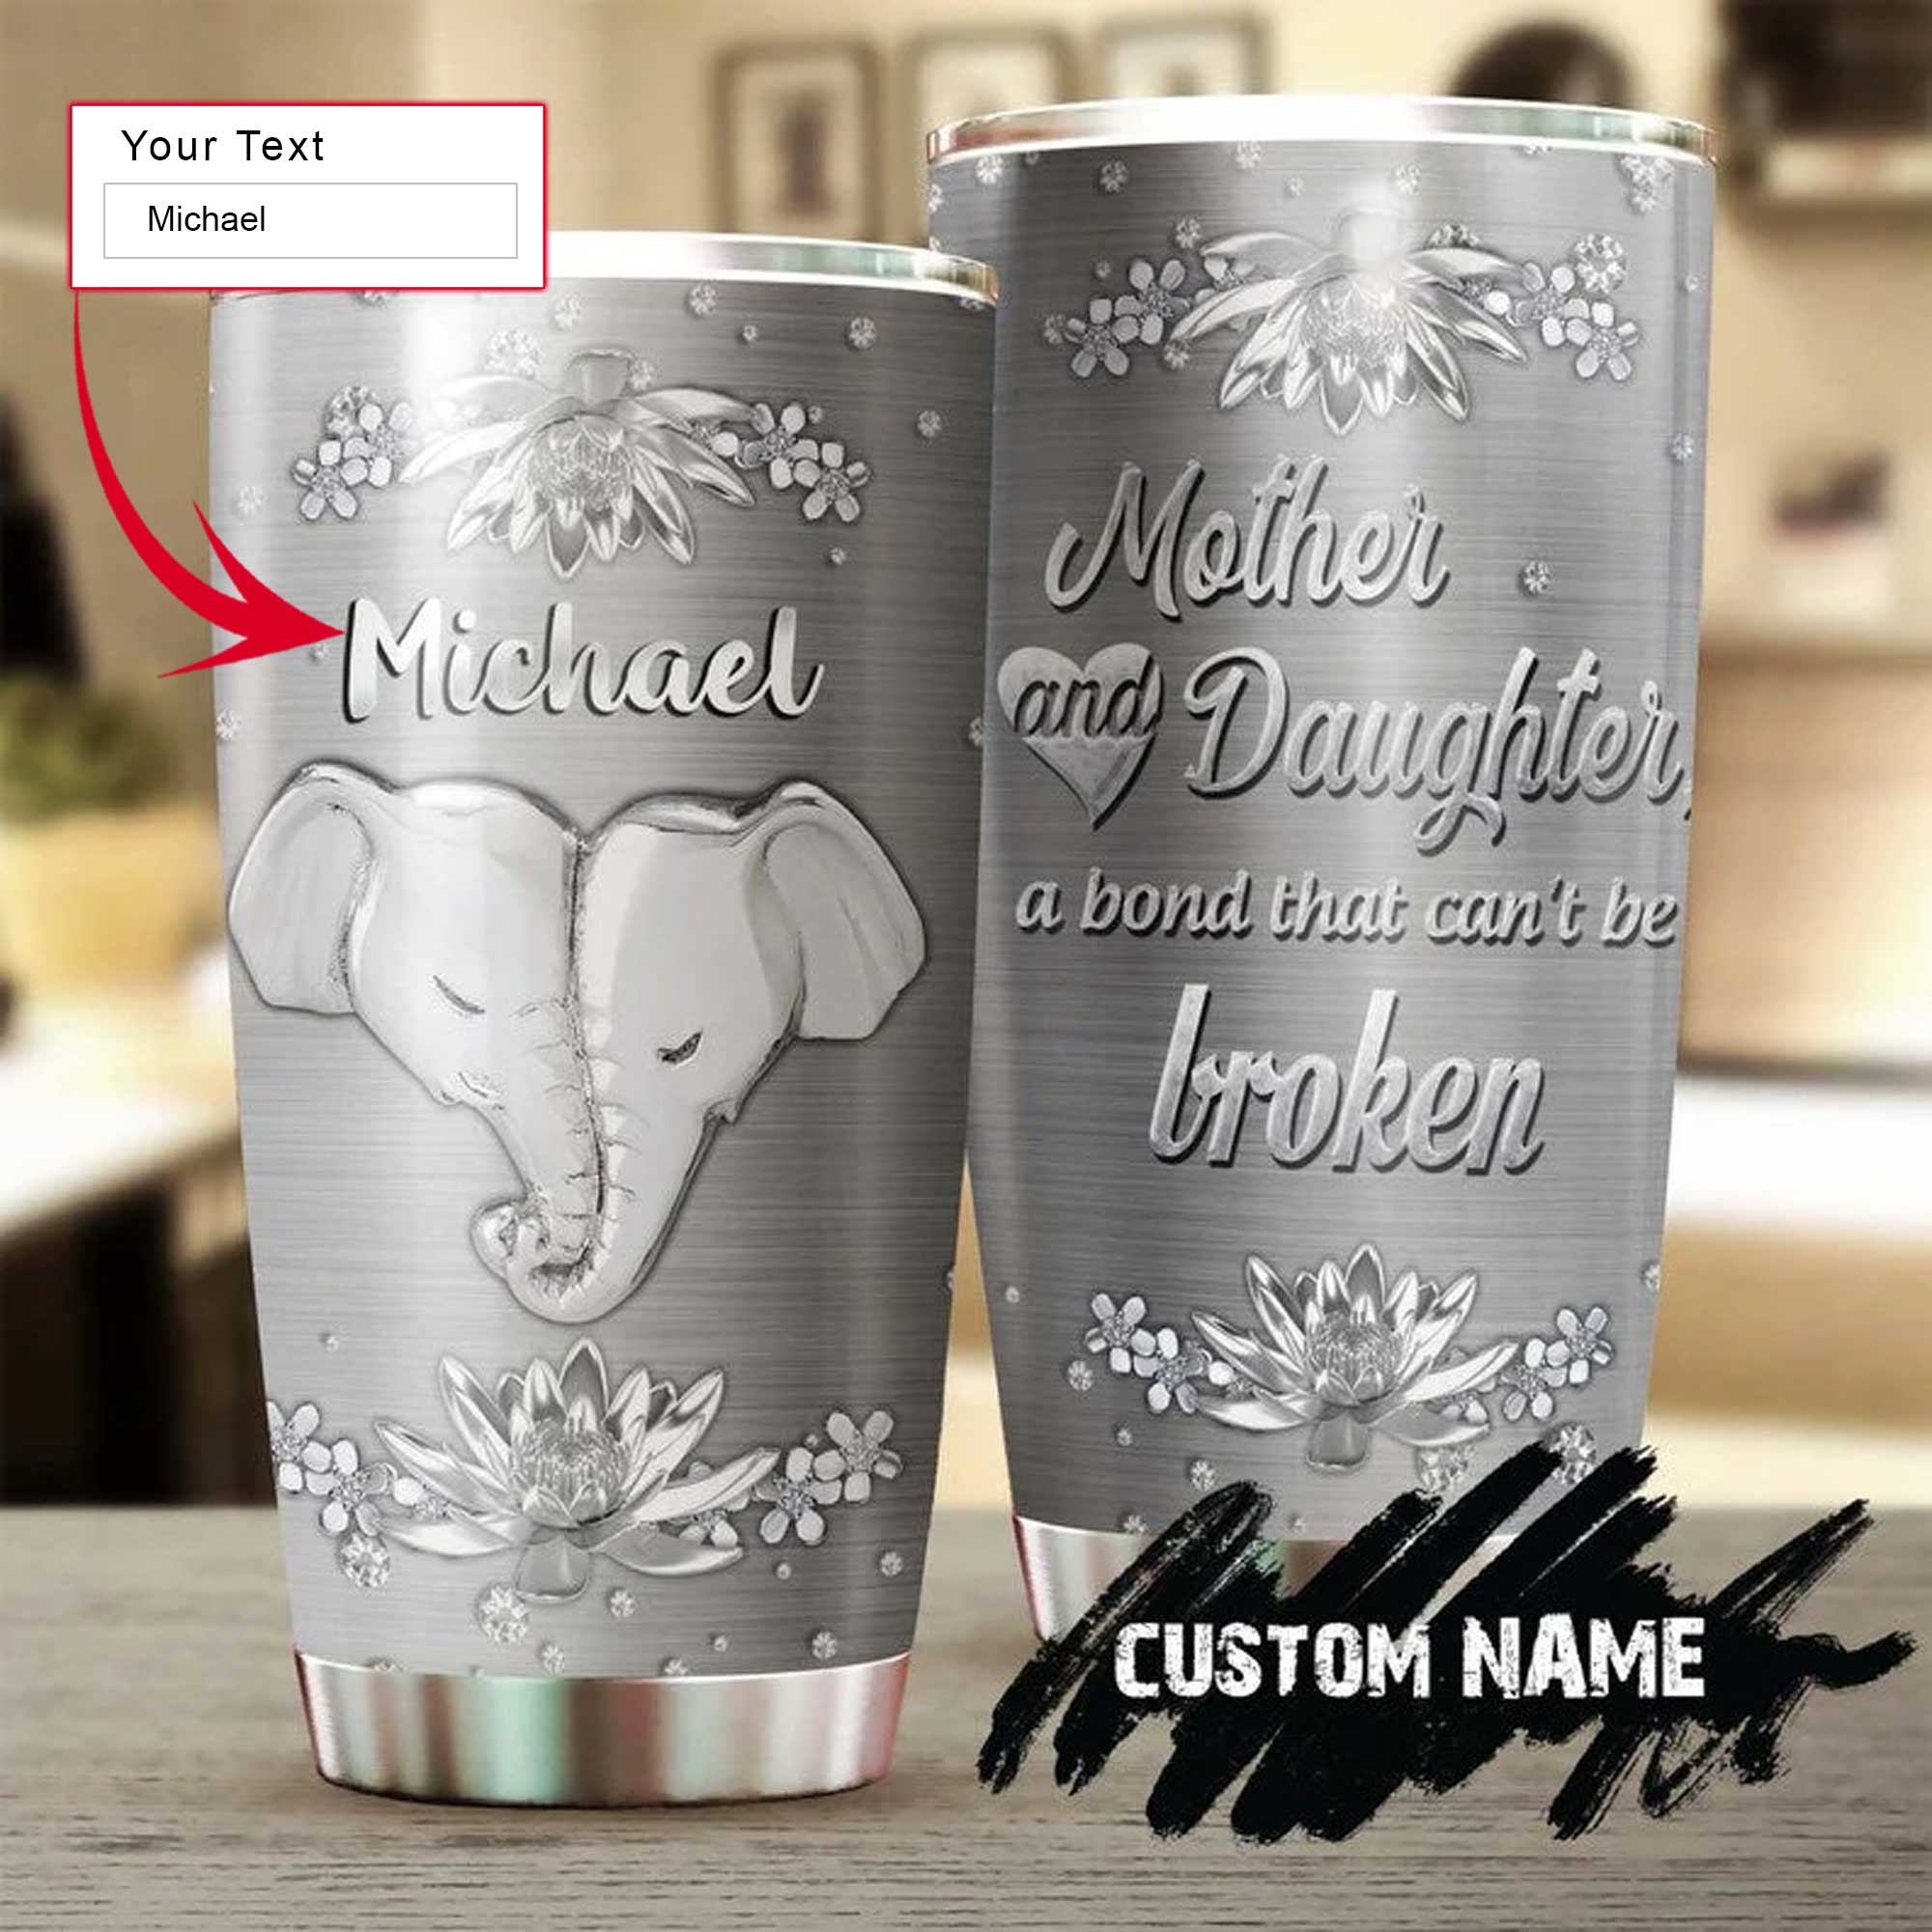 Personalized Mother's Day Gift Tumbler - Custom Gift For Mother's Day, Presents for Mom - Elephant Heart, Silver Style, A Bond Can't Be Broken Tumbler